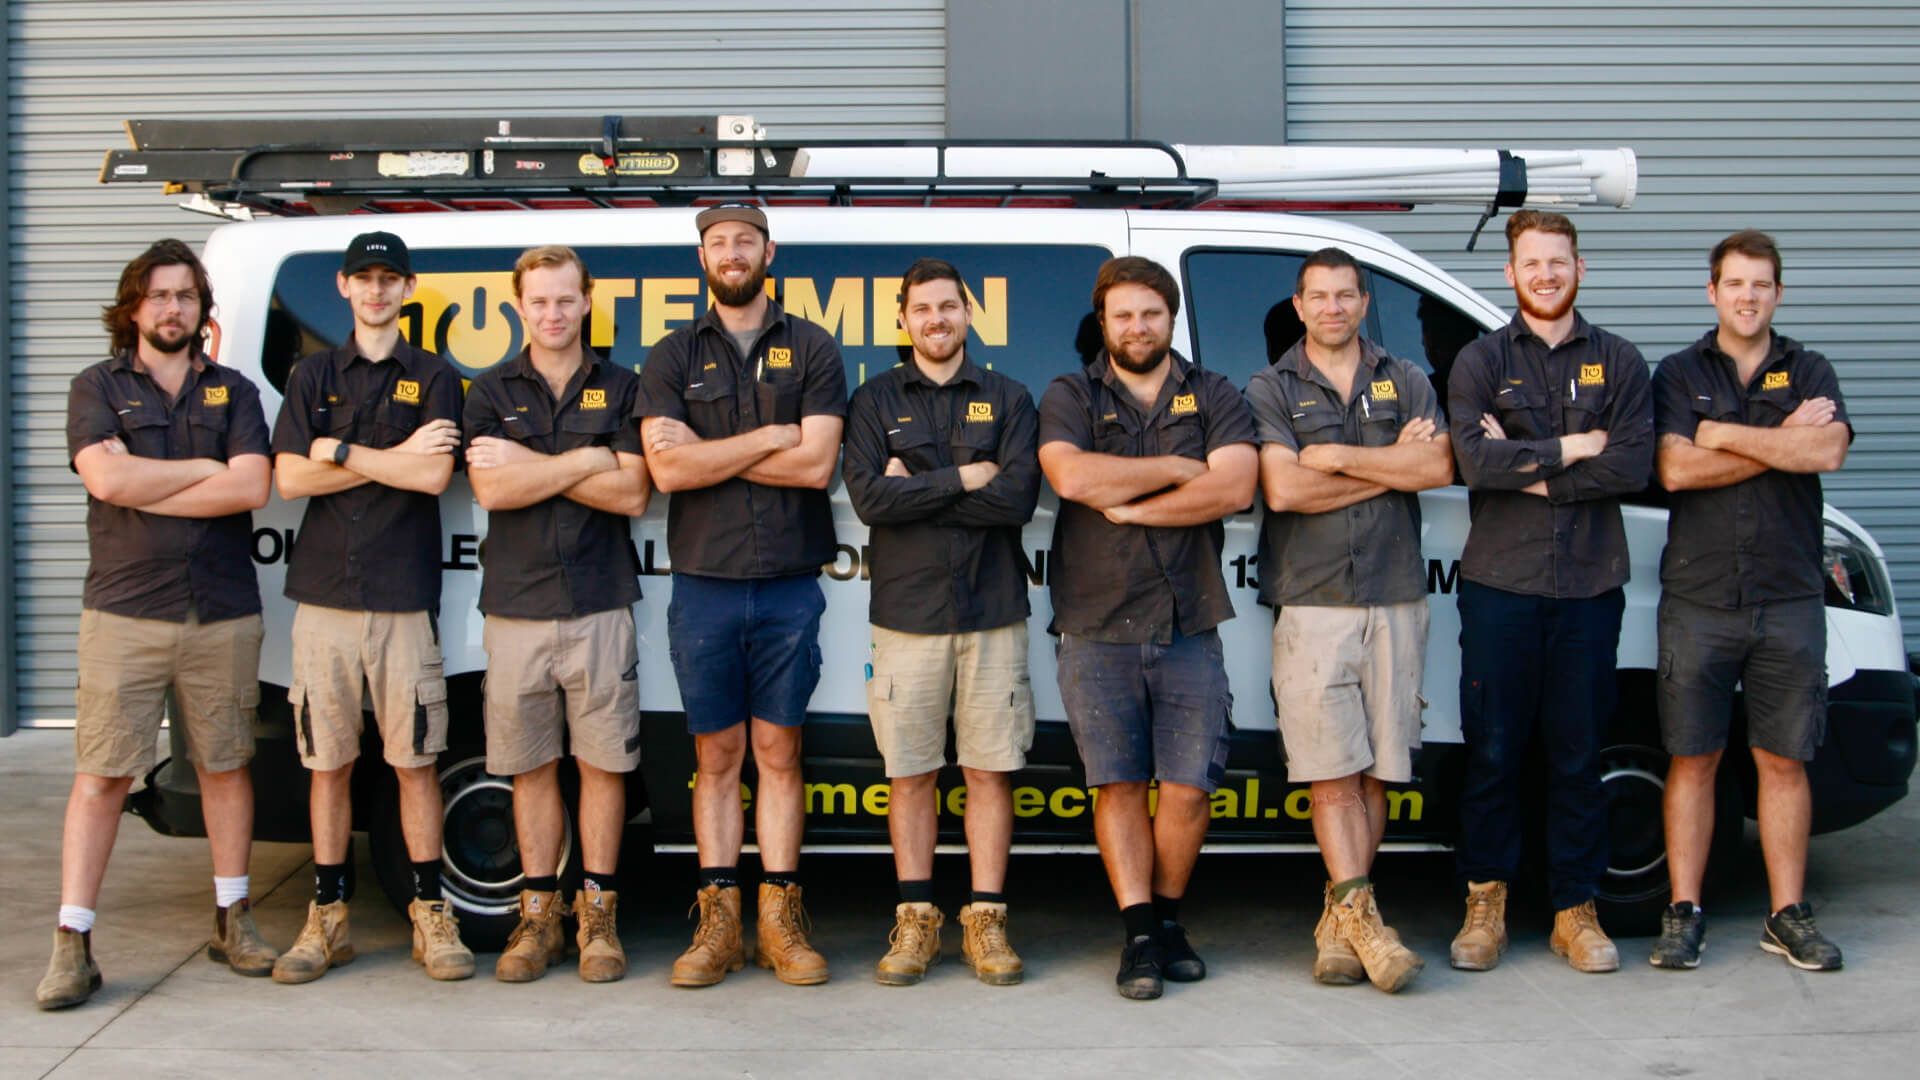 The team of Baringa electricians standing in front of the working van.